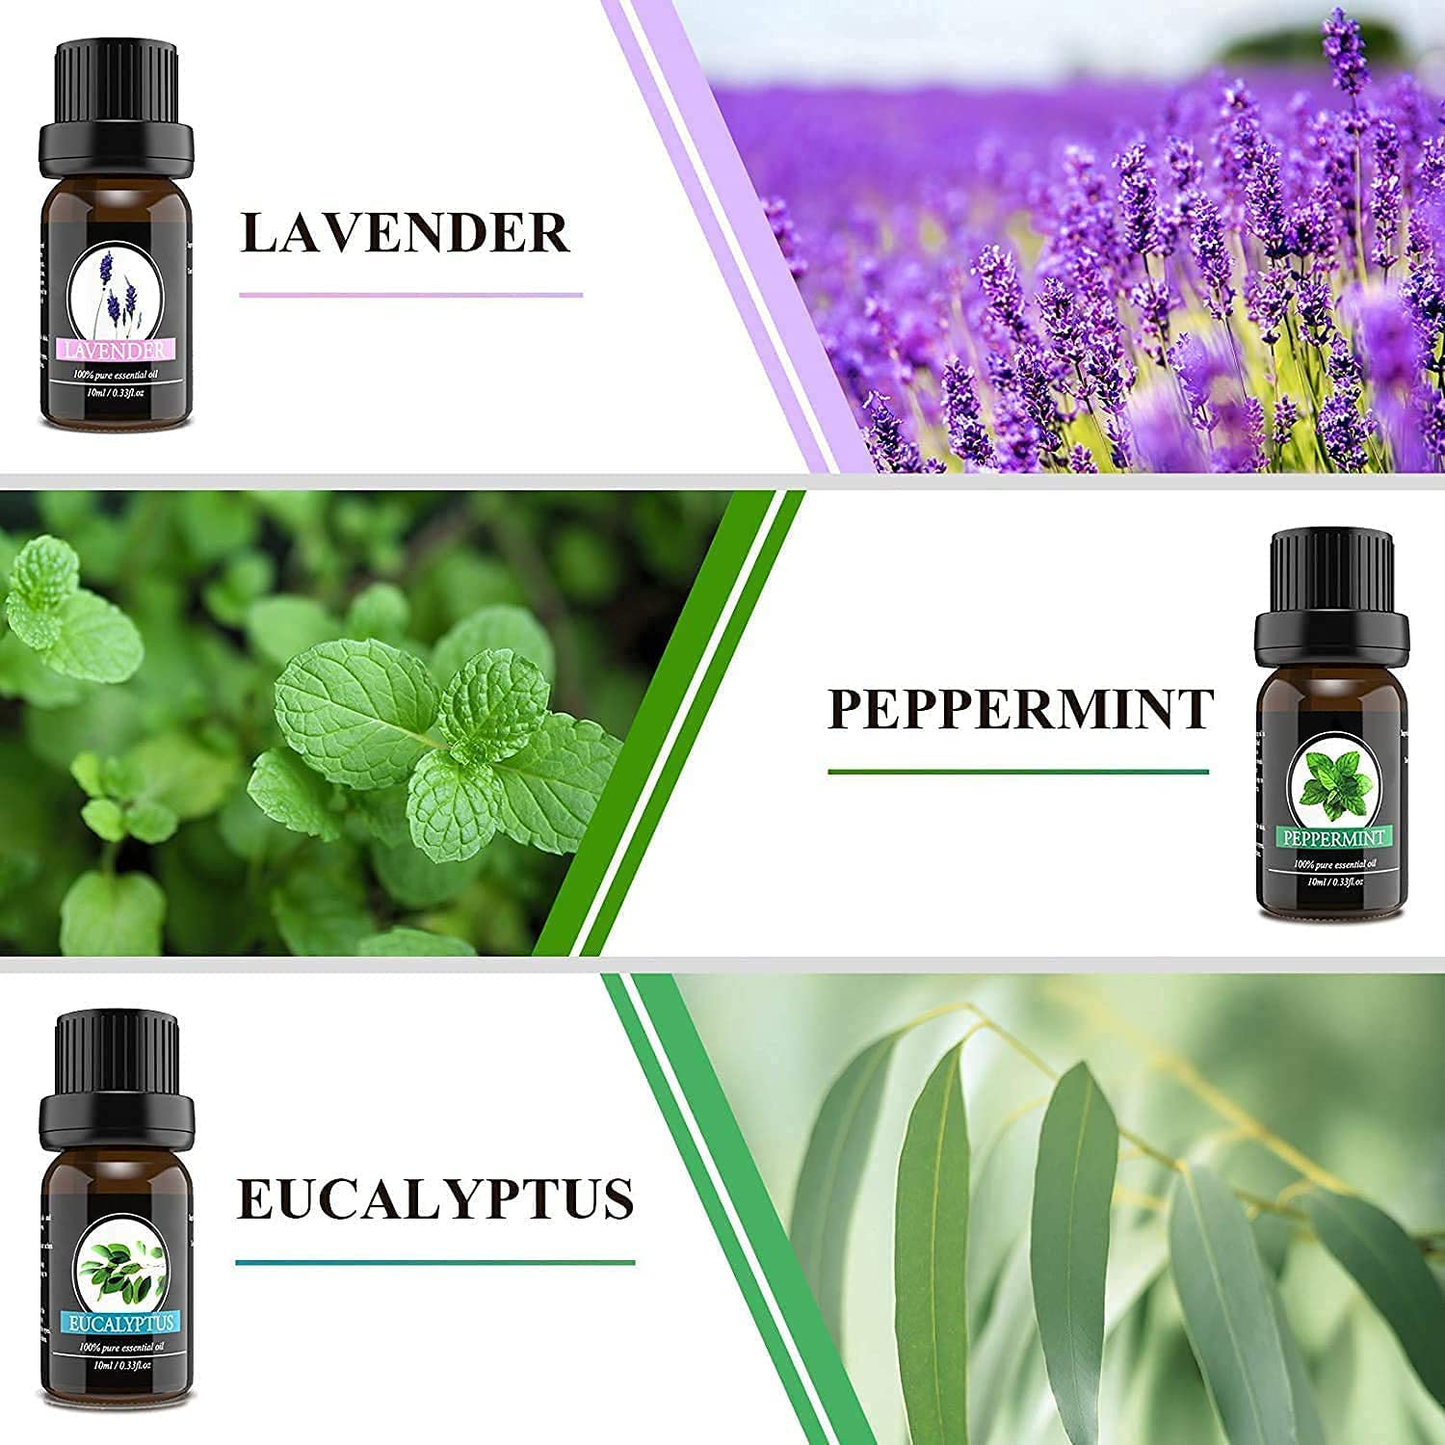 Essential Oils Set (Top 6) Essential Oils for Diffusers for Home, 100% Pure Natural,Aromatherapy Oils for Sleep,Essential Oils for Skin, Diffuser Oils 6X10Ml, Lavender, Eucalyptus, Peppermint, Etc.